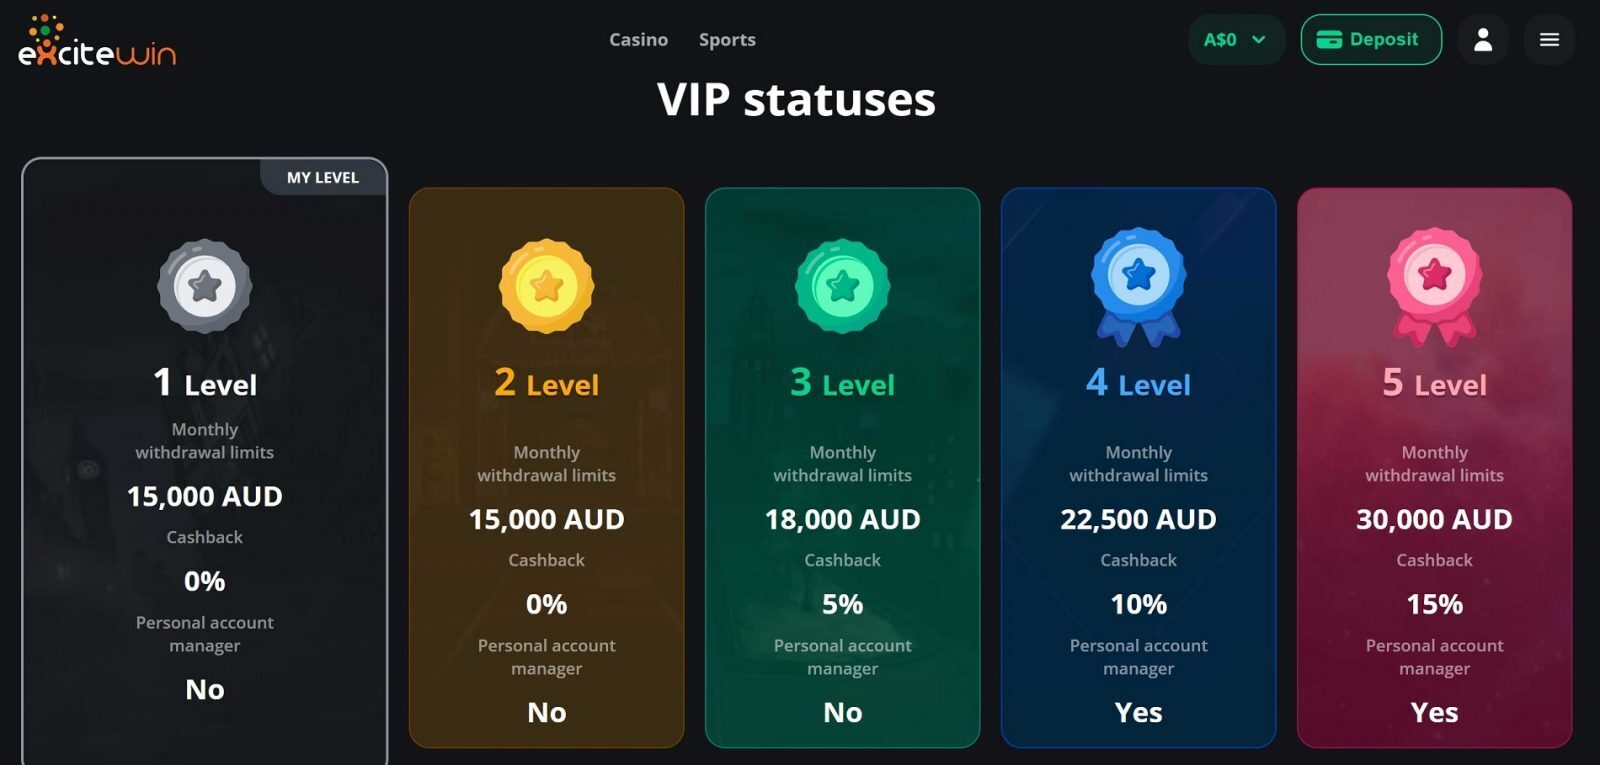 VIP Program at ExciteWin